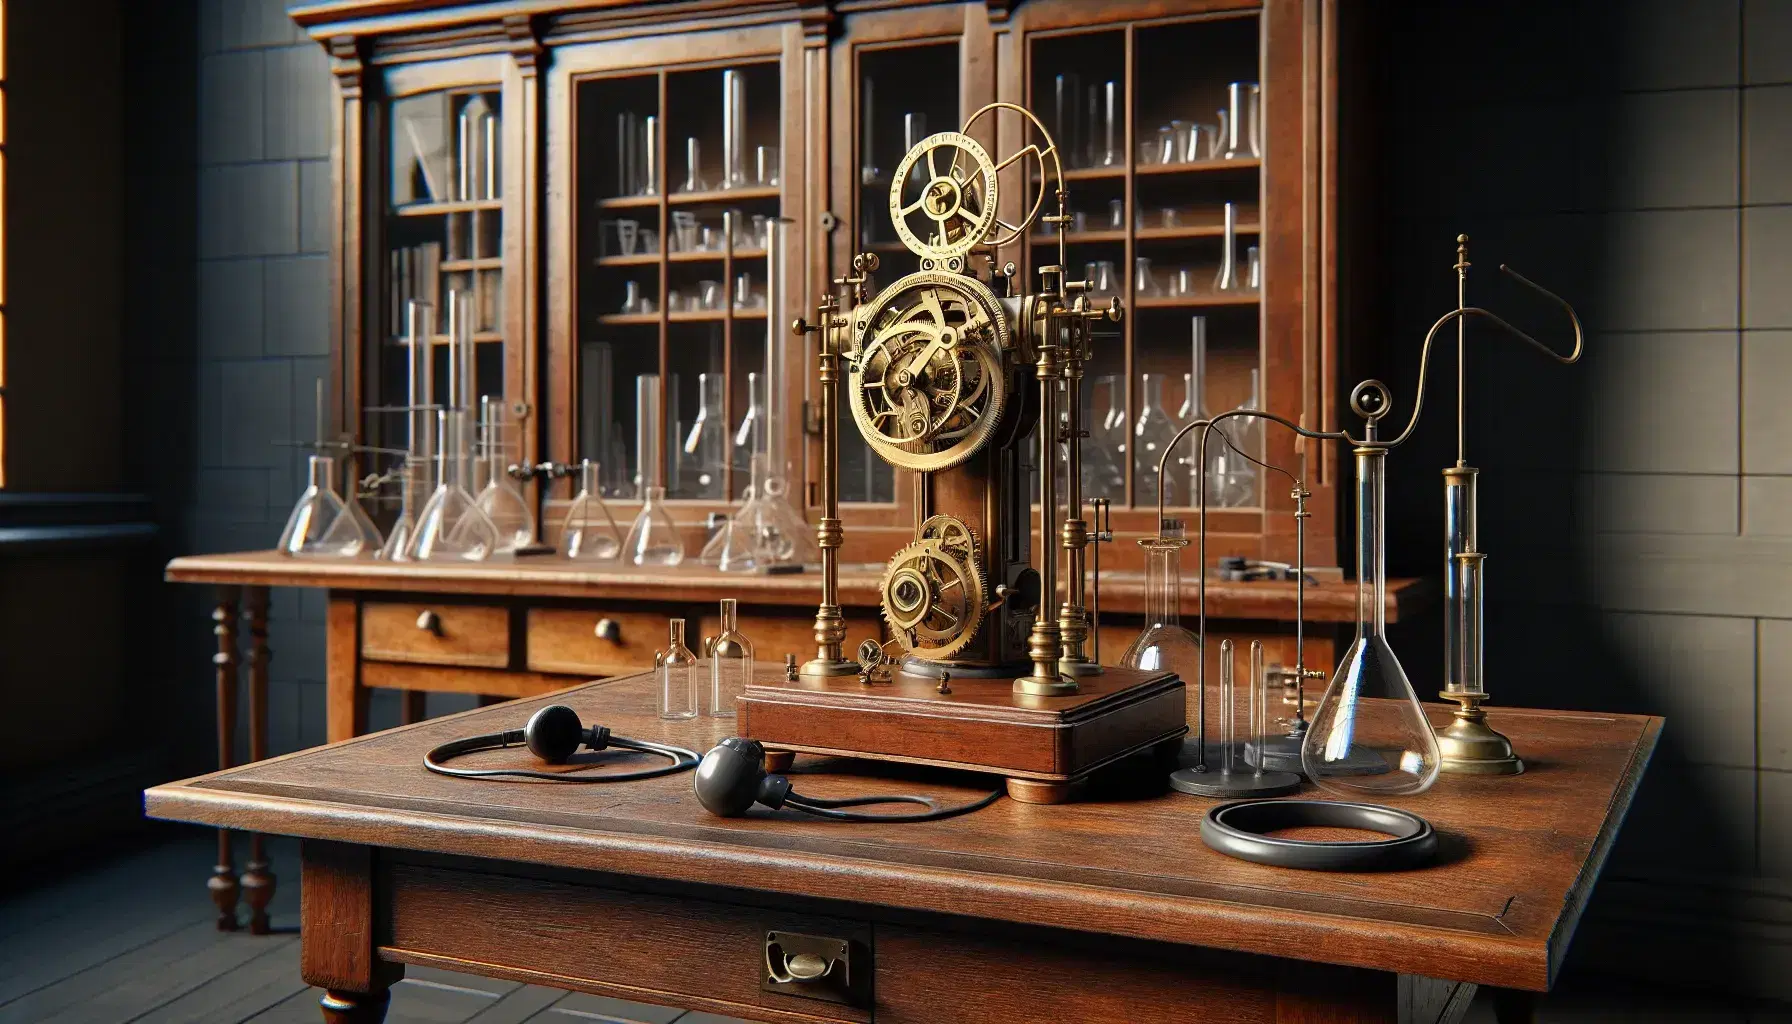 Historic laboratory from the late 19th century with wooden table, brass chronoscope, black headphones, cupboard with beaker and empty blackboard.